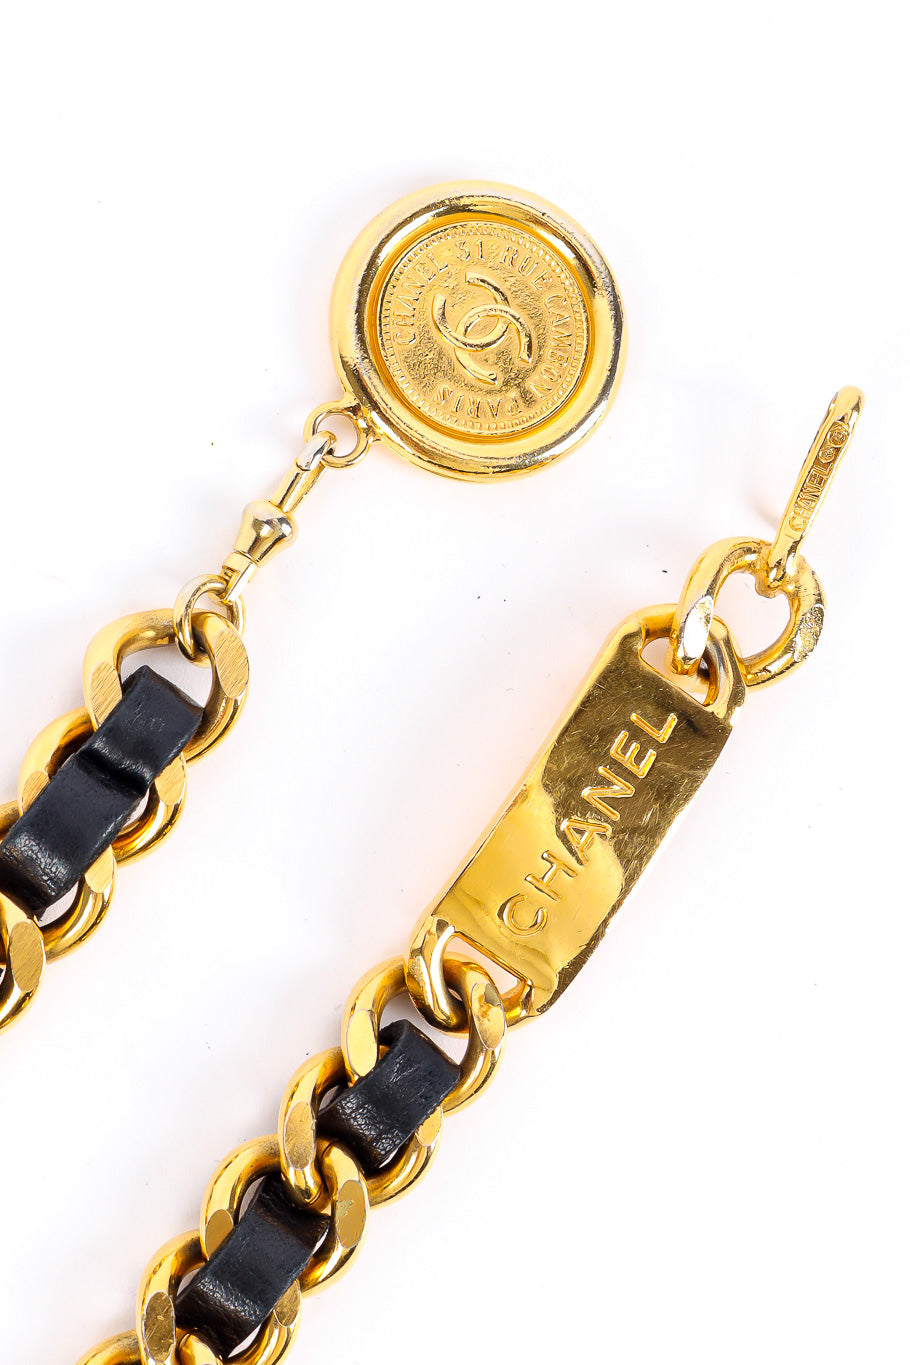 Iconic vintage coin belt by Chanel Photo on Mannequin CC Medallion and Plaque Photo. @recessla